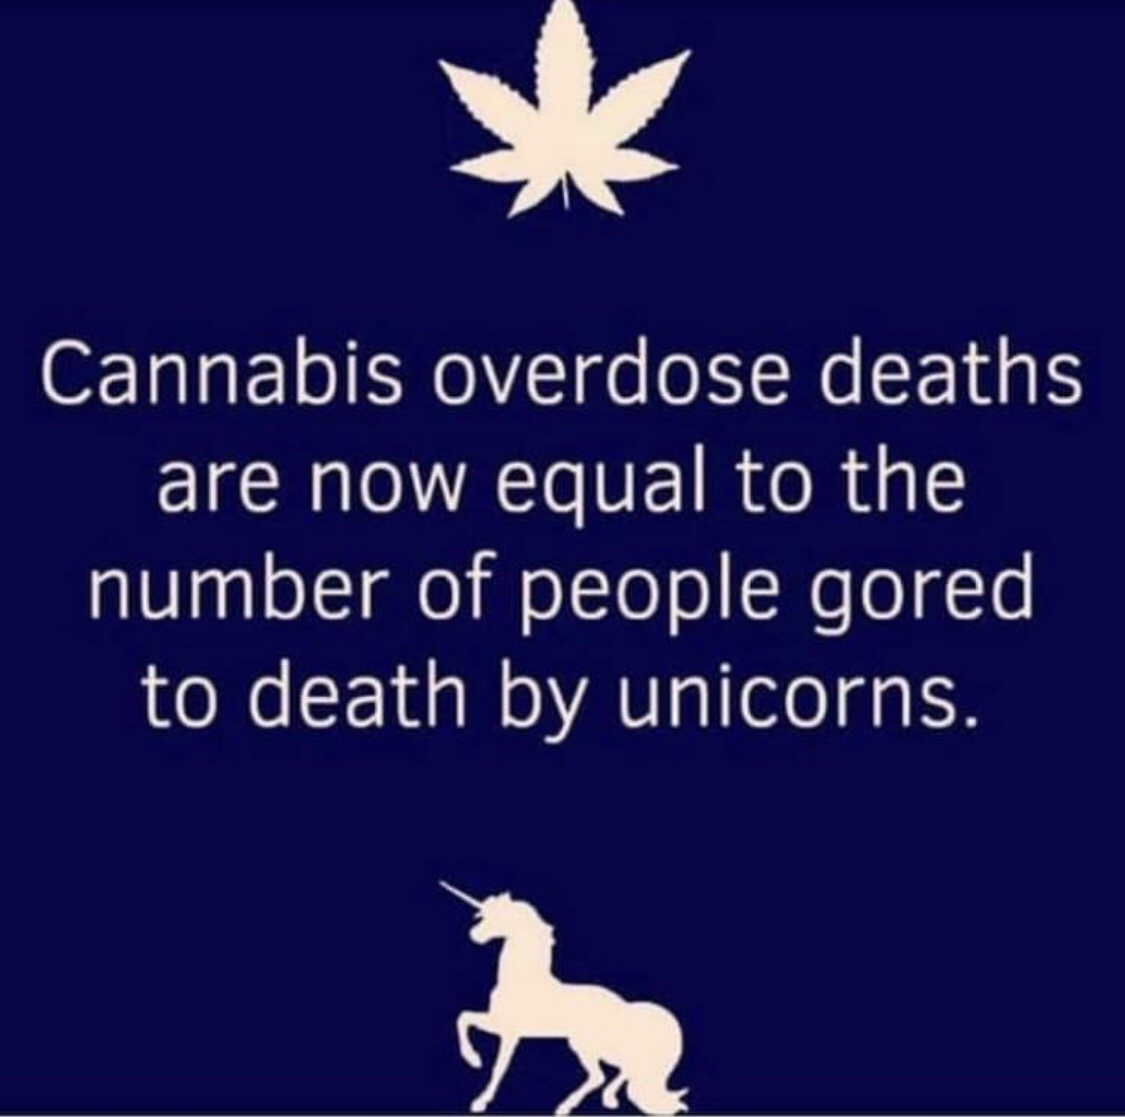 sky - Cannabis overdose deaths are now equal to the number of people gored to death by unicorns.